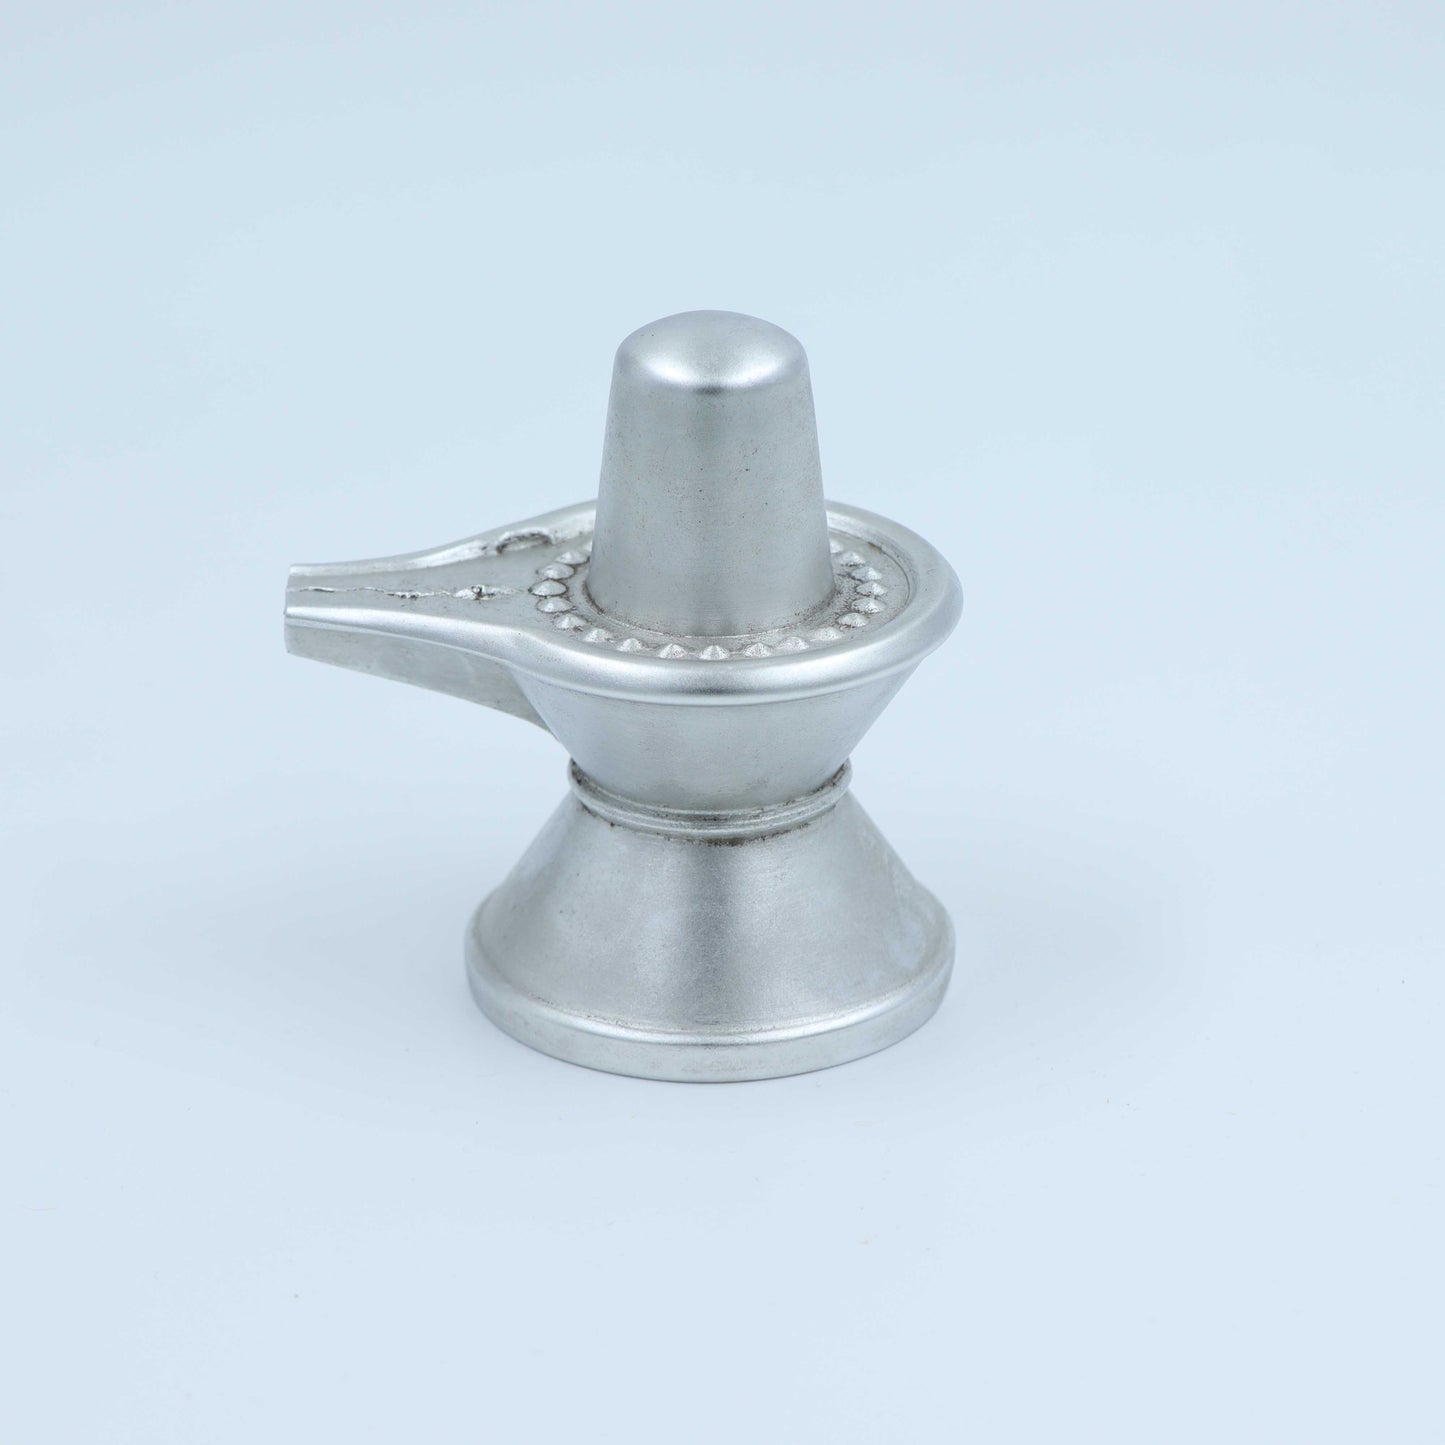 Shivling Figurine for puja